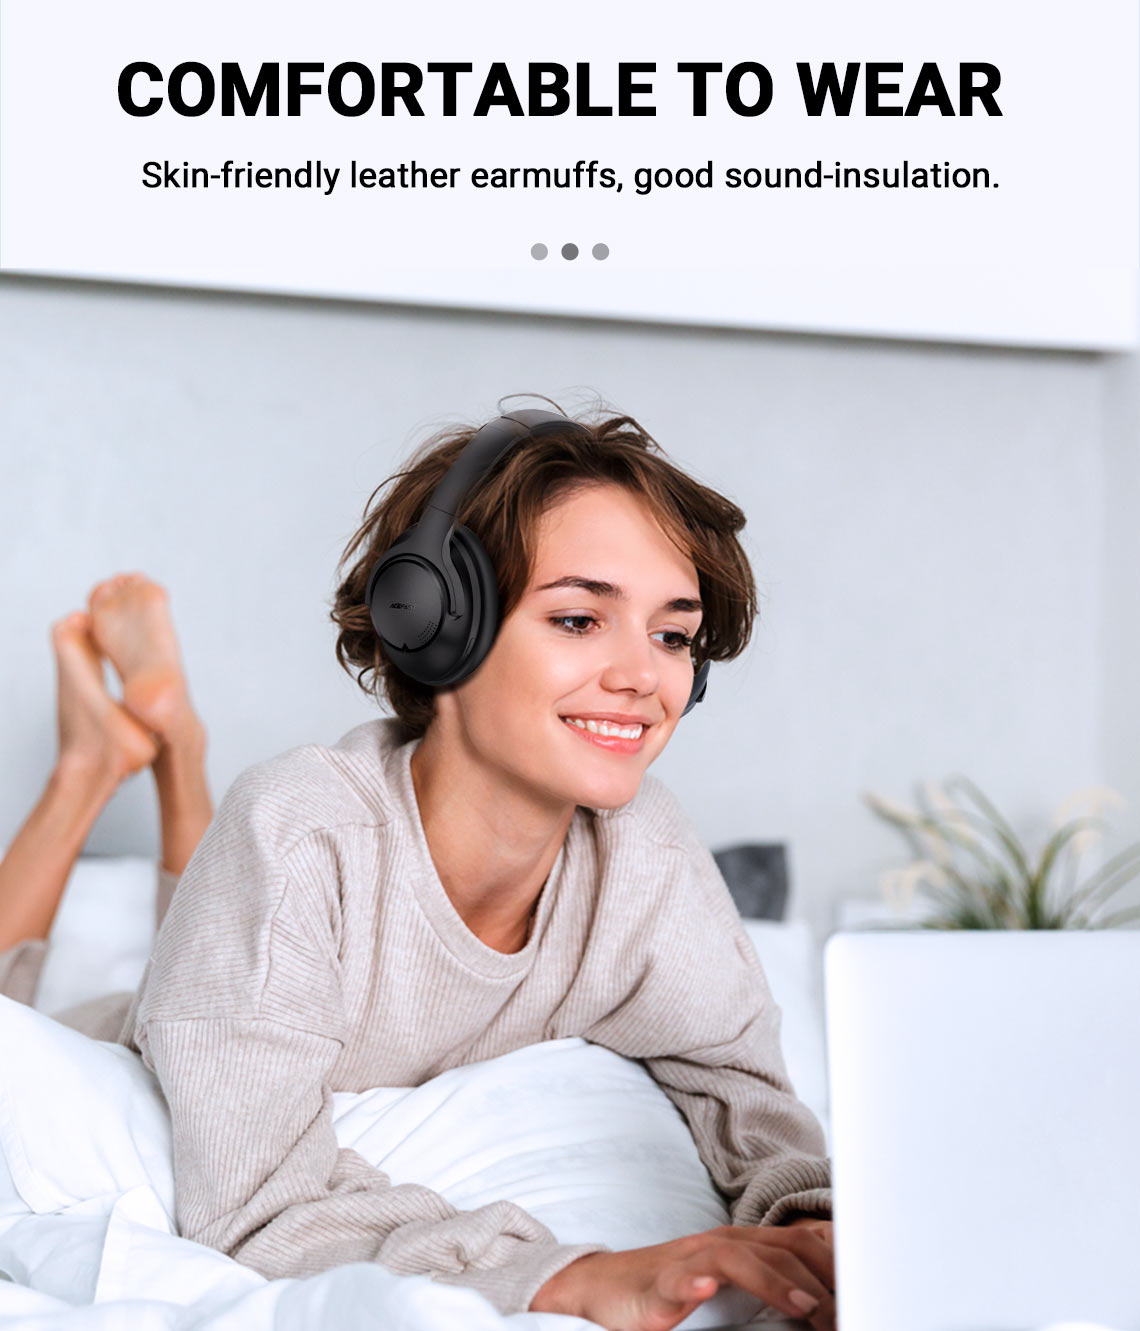 acefast h1 hybrid anc headphones comfortable to wear